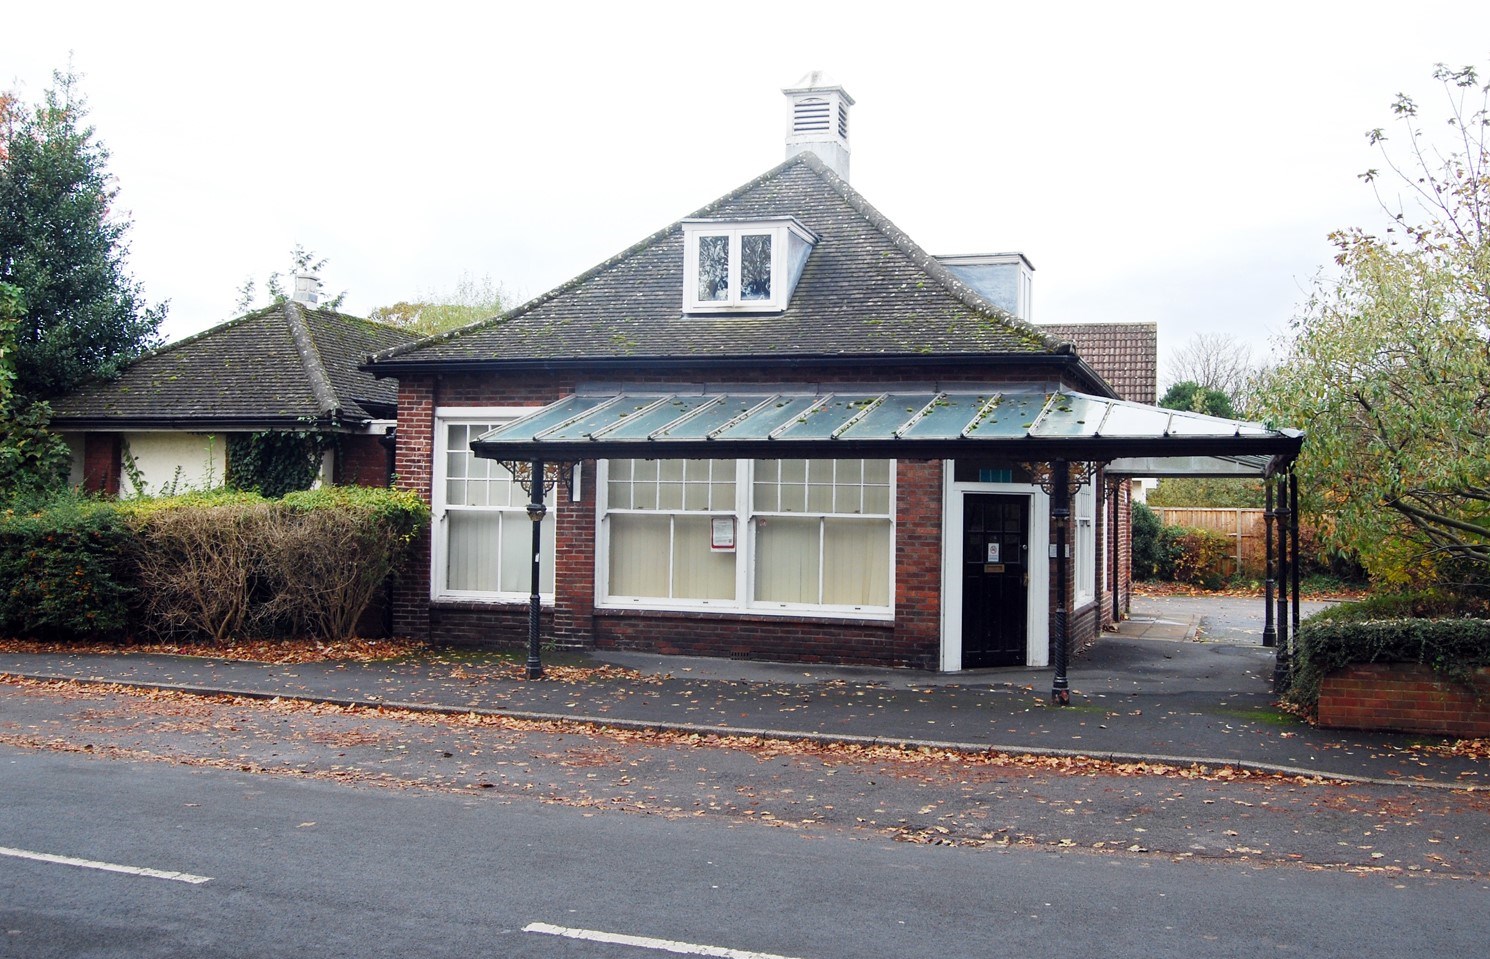 New provider to be sought for Freshfield Surgery